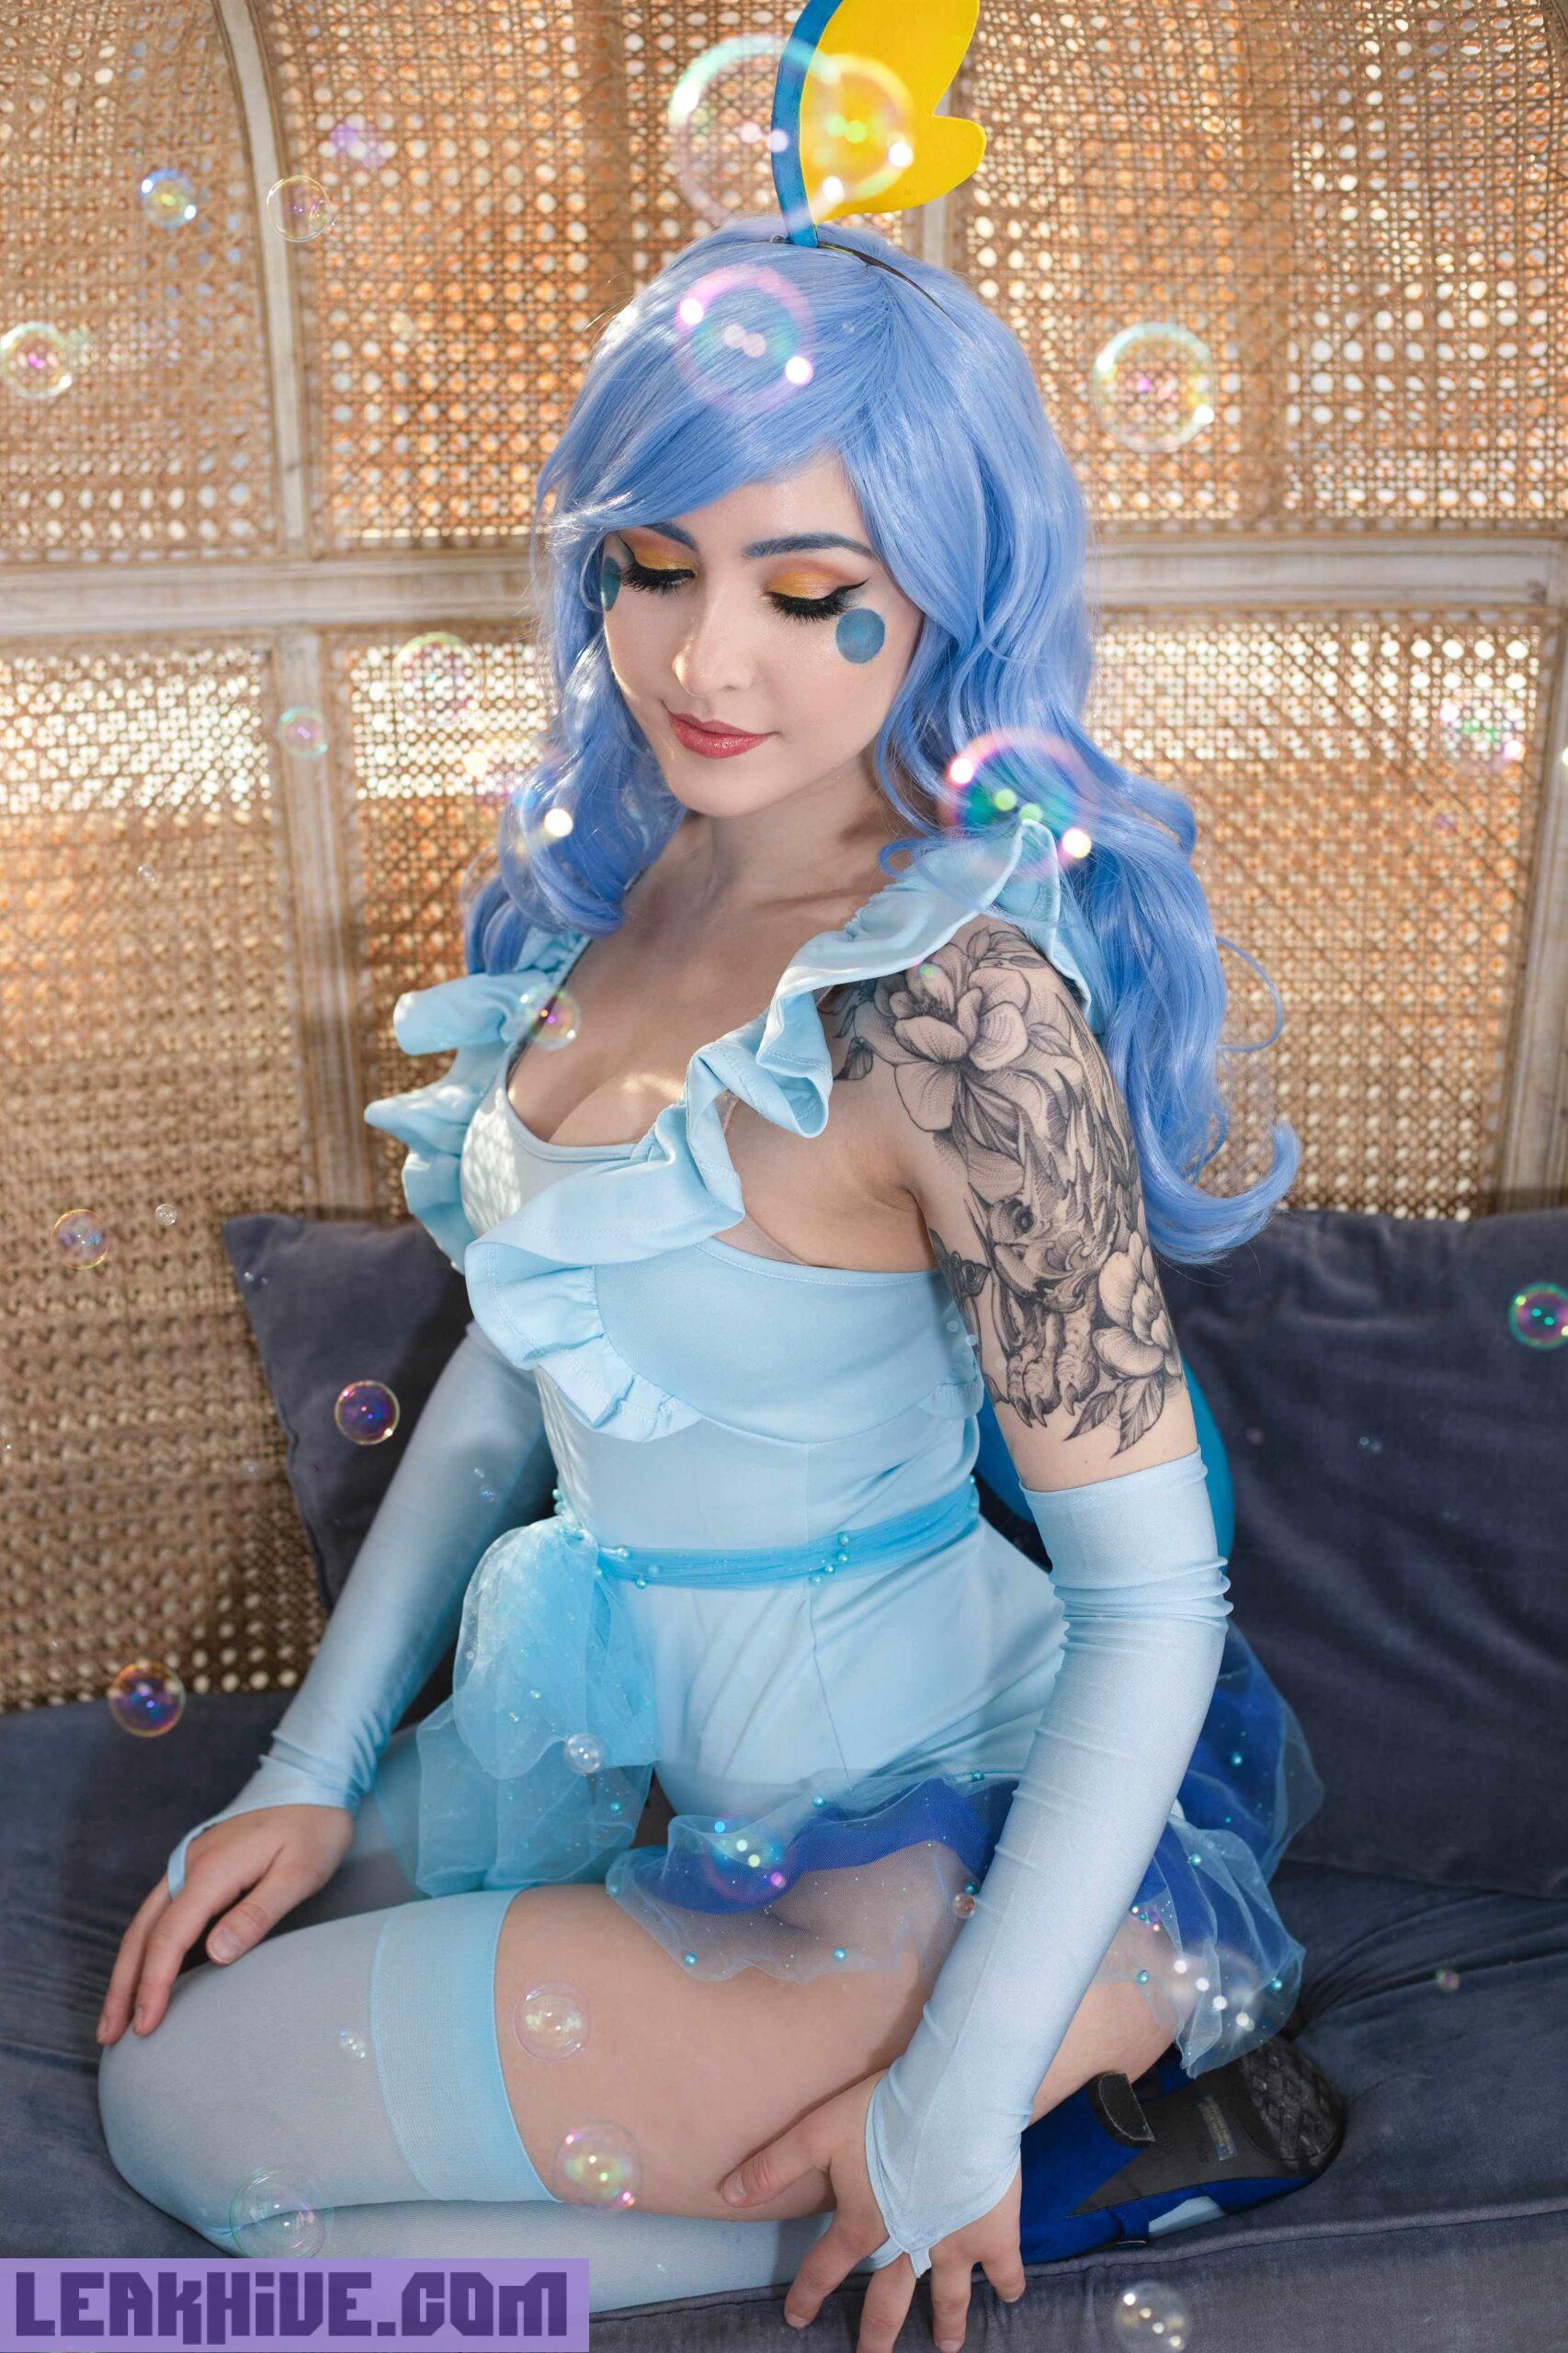 1650056413 800 Luxlo Cosplay Sobble 20 scaled